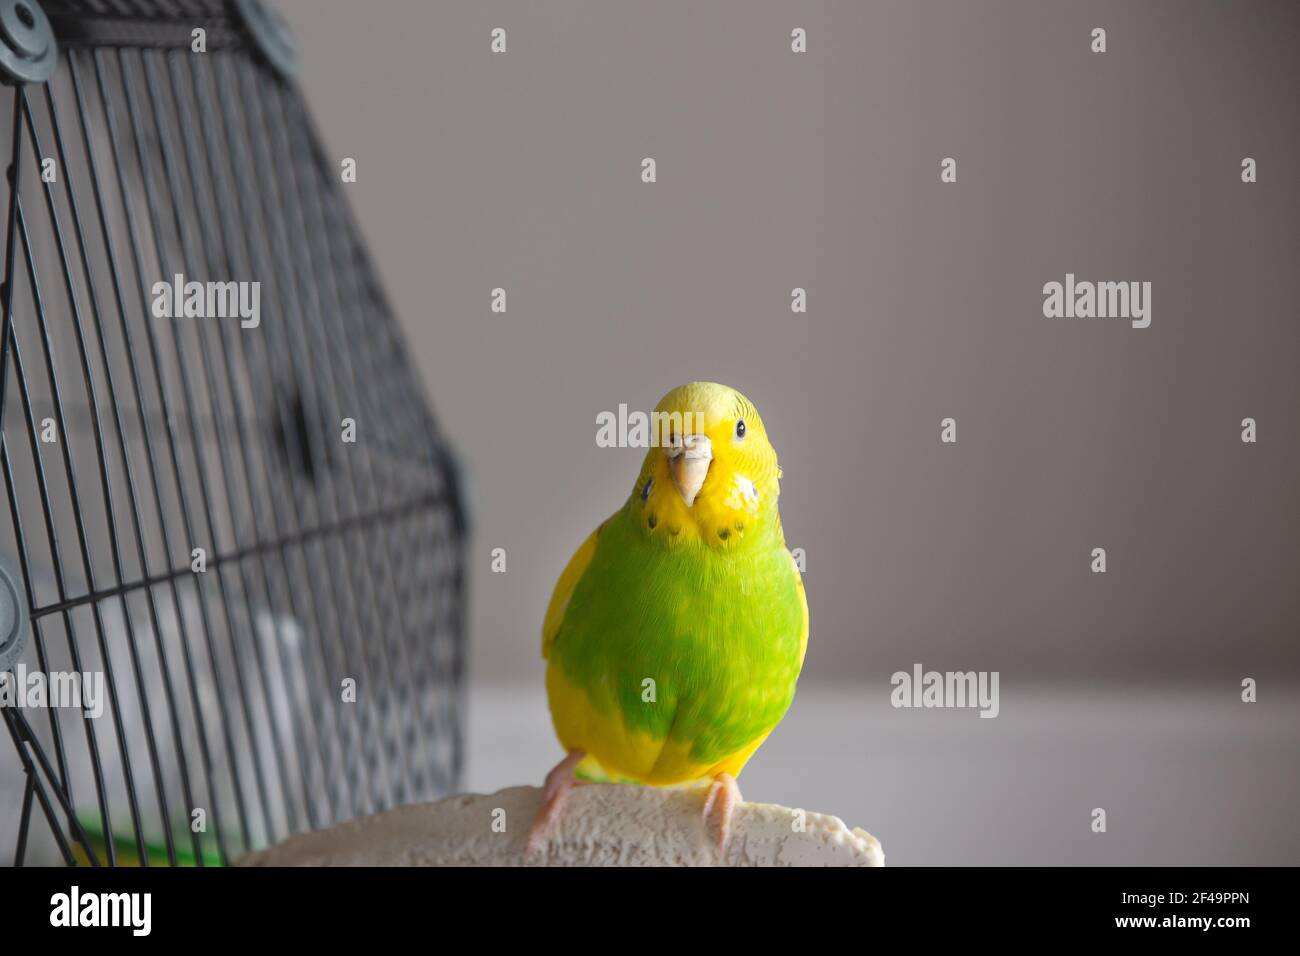 Portrait of a green and yellow budgerigar parakeet sitting on a cuttle fish bone on the side of her cage lit by window light. Stock Photo